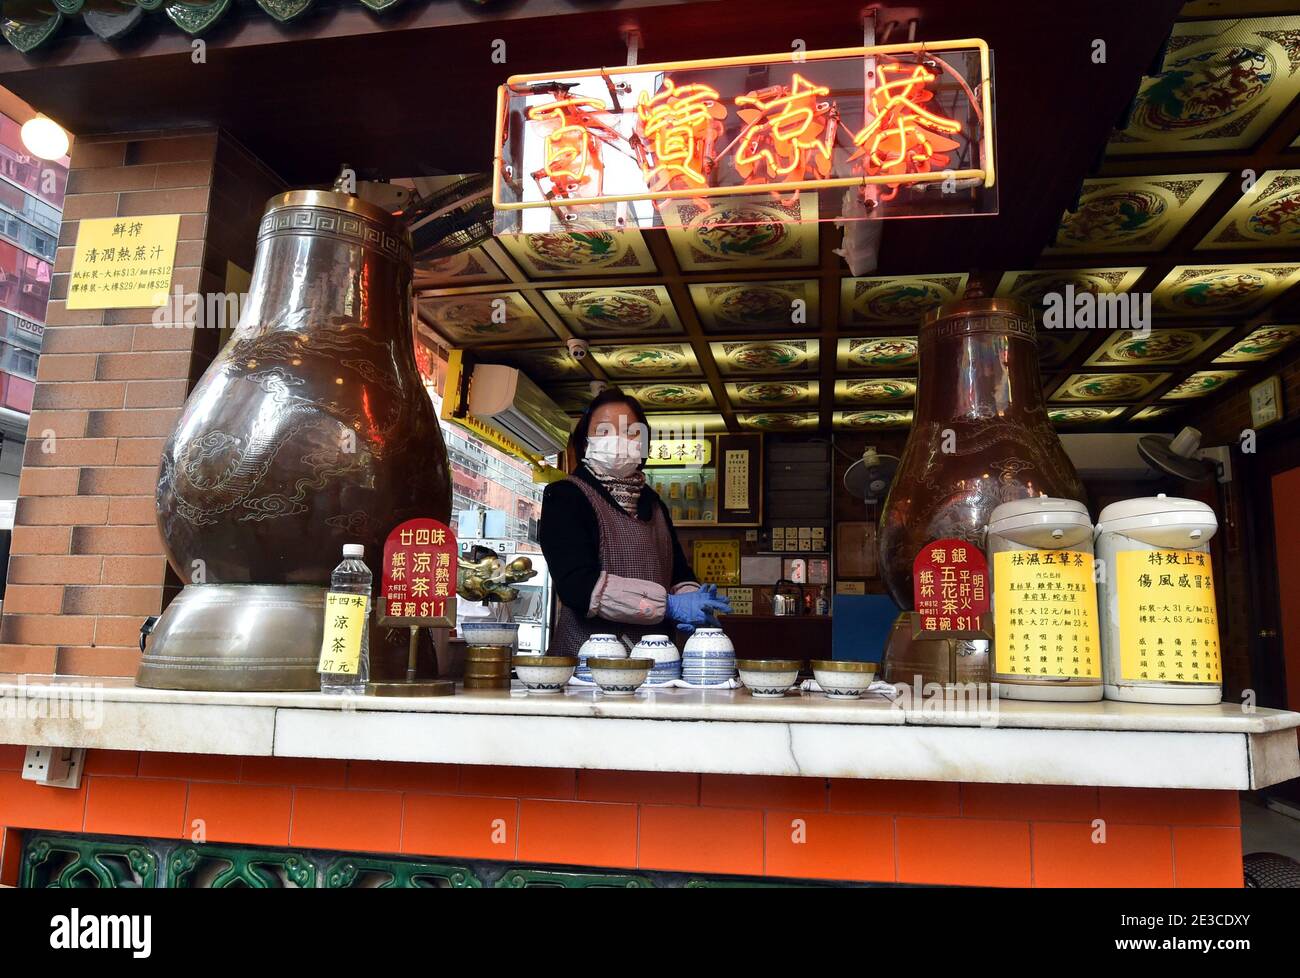 Hong Kong. 18th Jan, 2021. A staff member is seen at a herbal tea shop in south China's Hong Kong, Jan. 18, 2021. Hong Kong's Center for Health Protection (CHP) reported 107 additional confirmed cases of COVID-19 on Monday, a new high in about one month. The new cases included 102 local infections and five imported ones, taking its total tally to 9,664. More than 40 of the new local cases were untraceable and there were about 50 cases tested positive preliminarily, according to a CHP press briefing. Credit: Lo Ping Fai/Xinhua/Alamy Live News Stock Photo